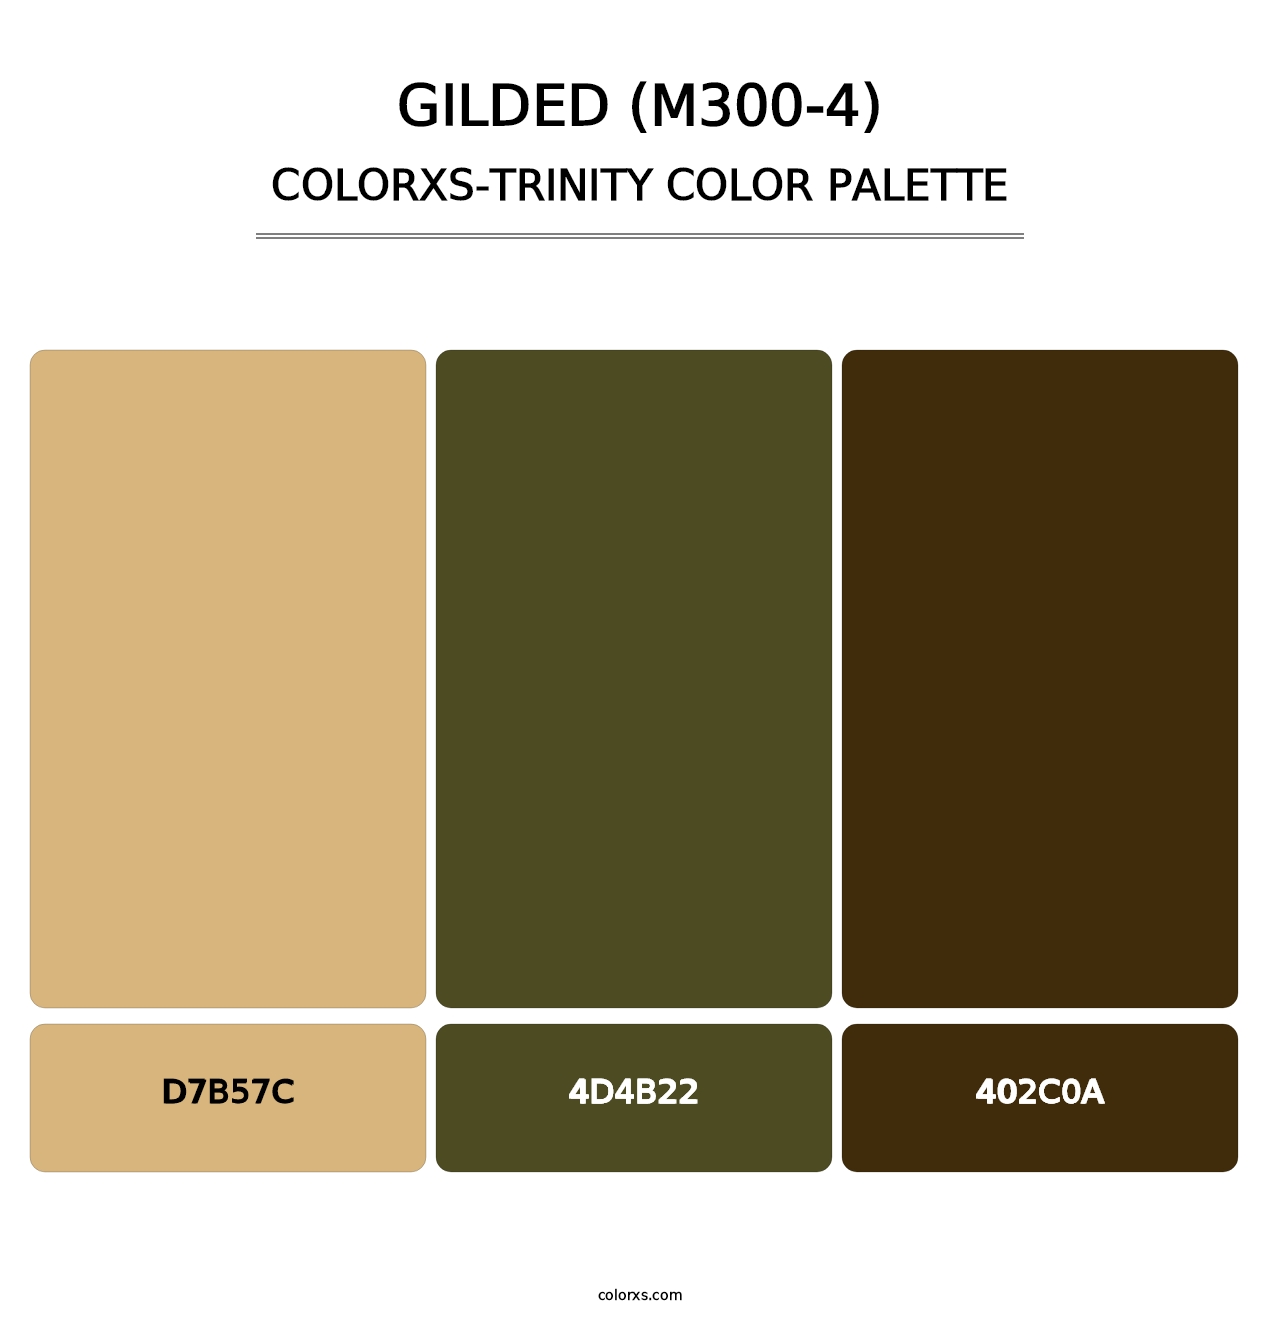 Gilded (M300-4) - Colorxs Trinity Palette